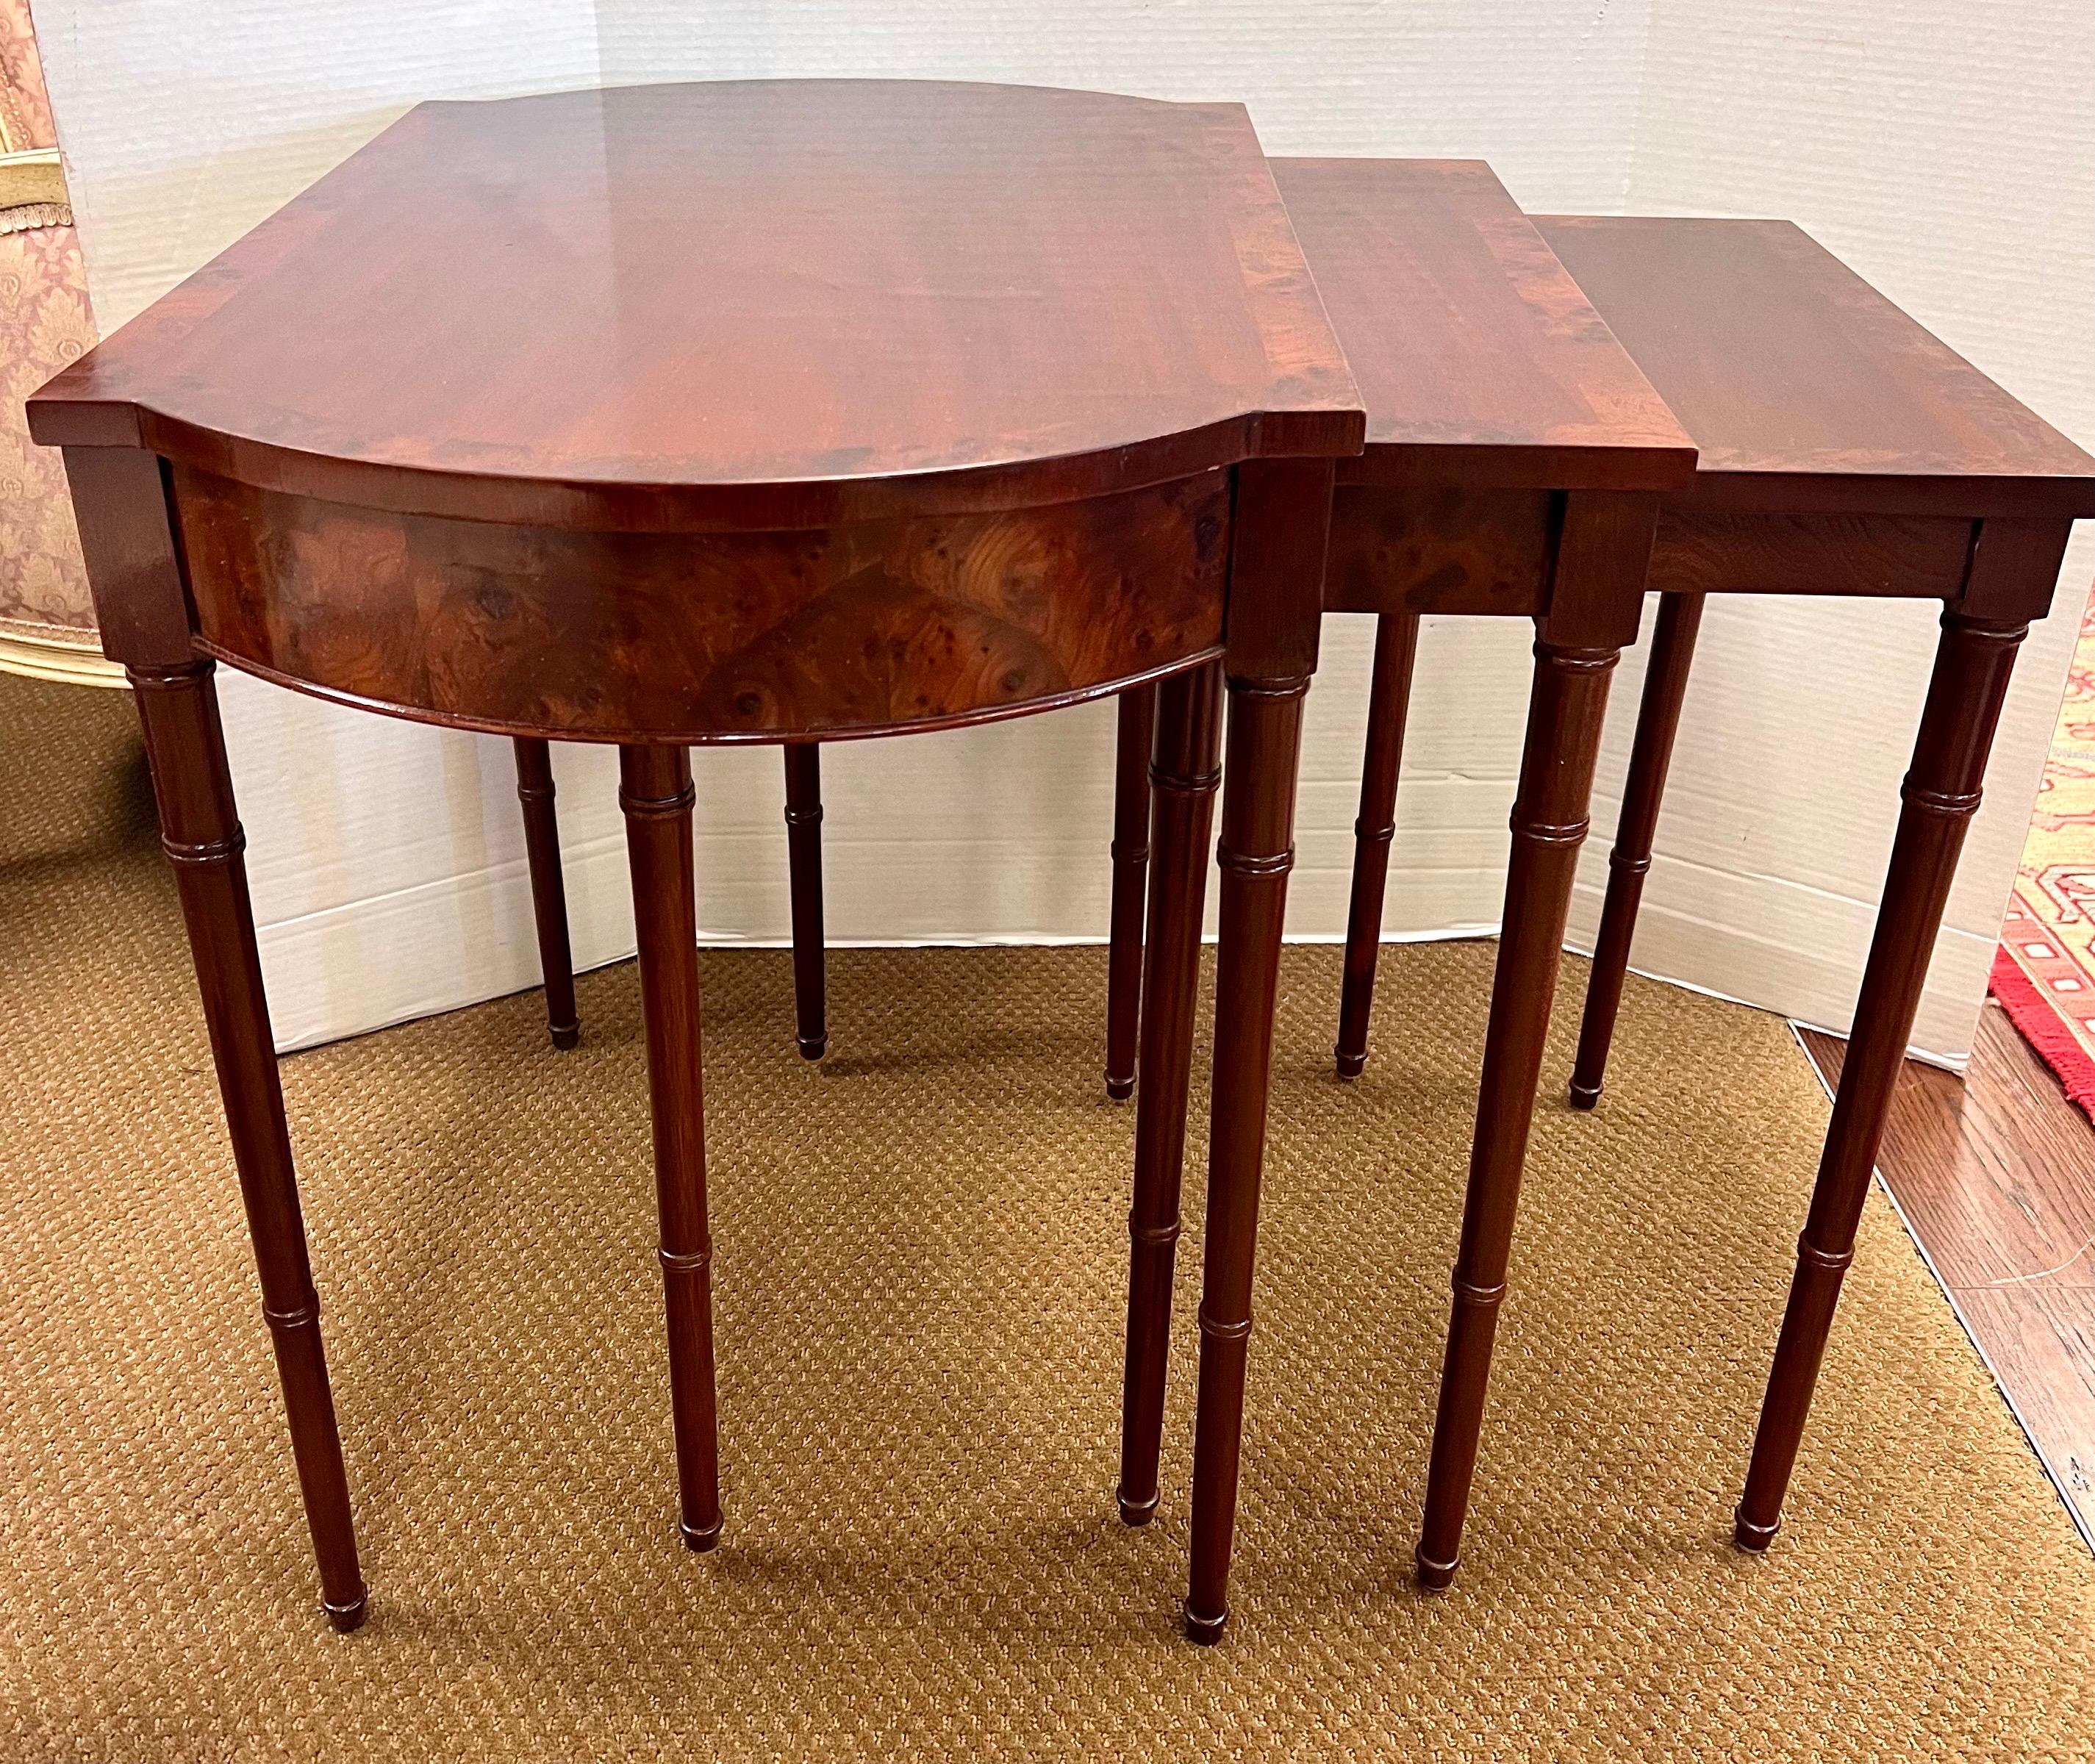 Set of 3 Baker Mahogany Nesting Tables crafted from rich mahogany wood, these tables exude sophistication and elegance. The nesting design offers versatility and space-saving convenience, allowing you to effortlessly expand your surface area when